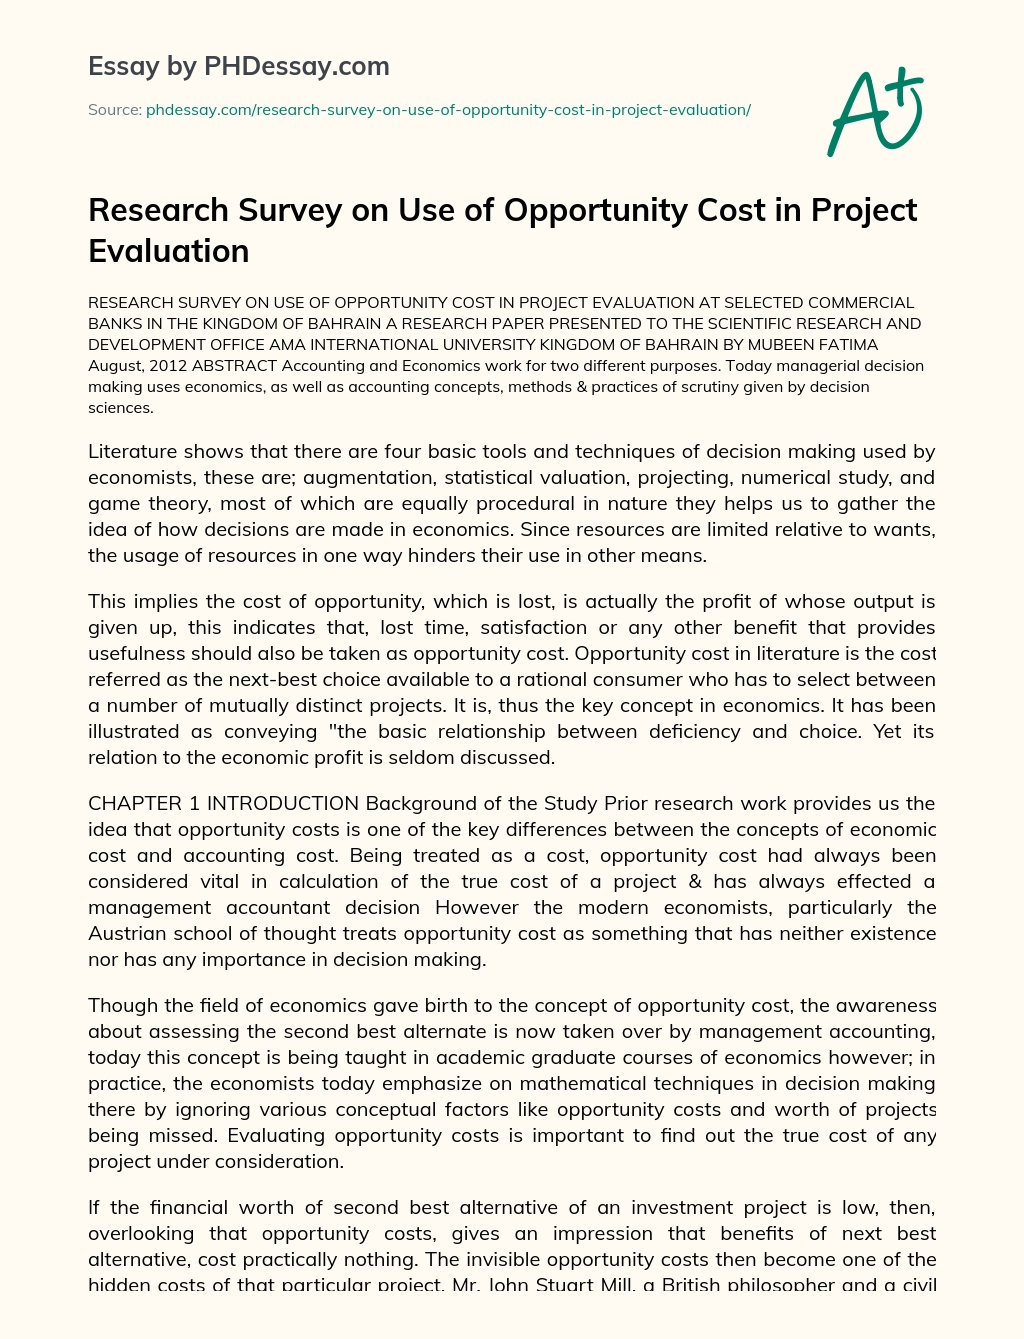 Research Survey on Use of Opportunity Cost in Project Evaluation essay